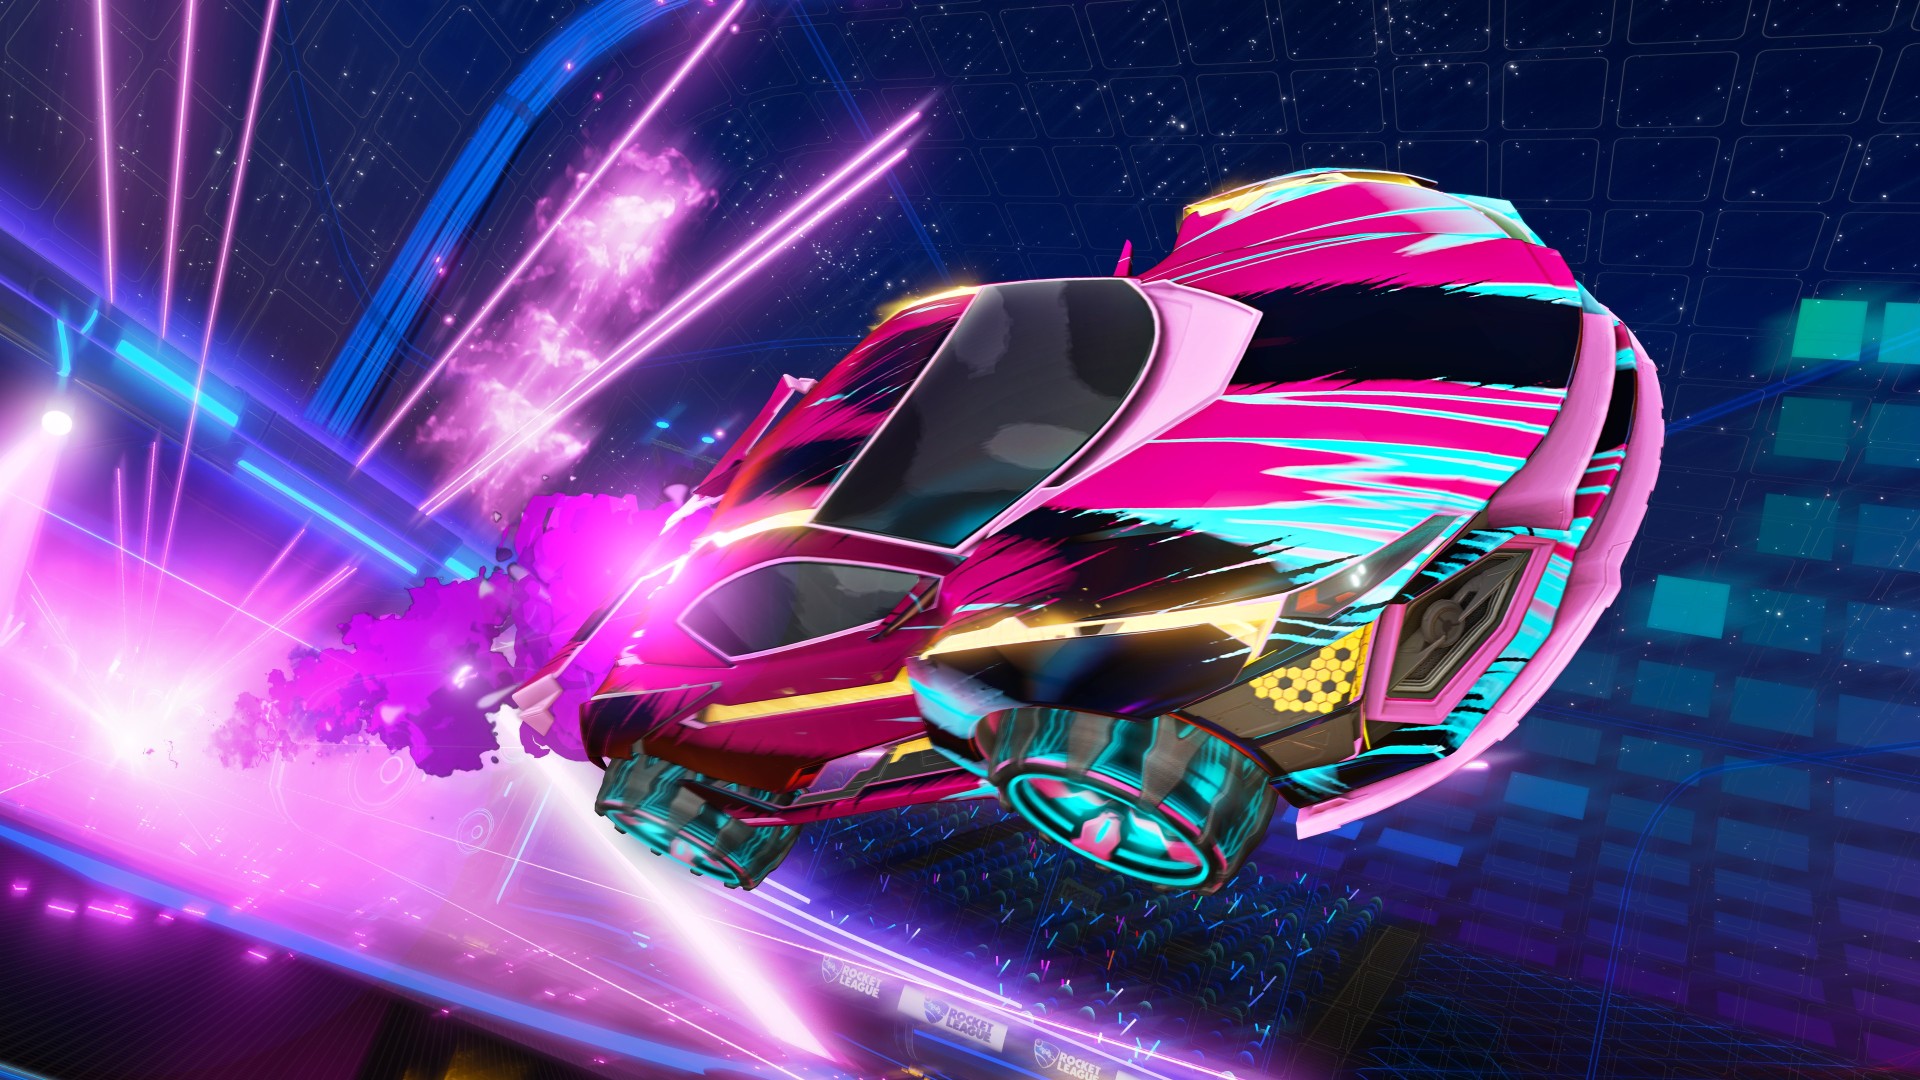 Season 2 Drops December 9 in Rocket League with Xbox Series XS Optimizations